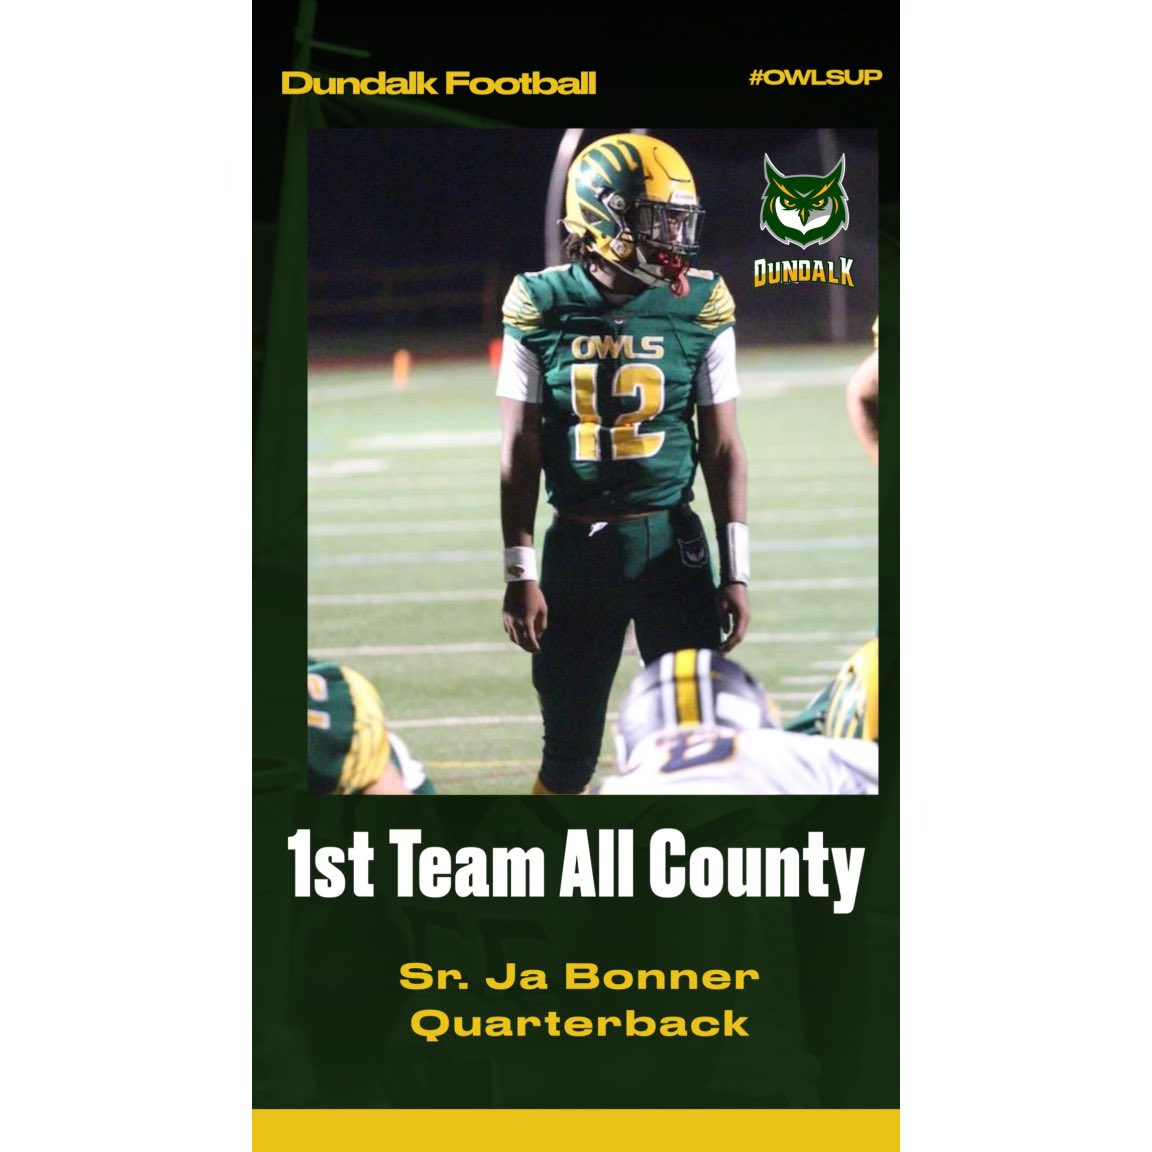 Blessed to be named 1st Team All County!!